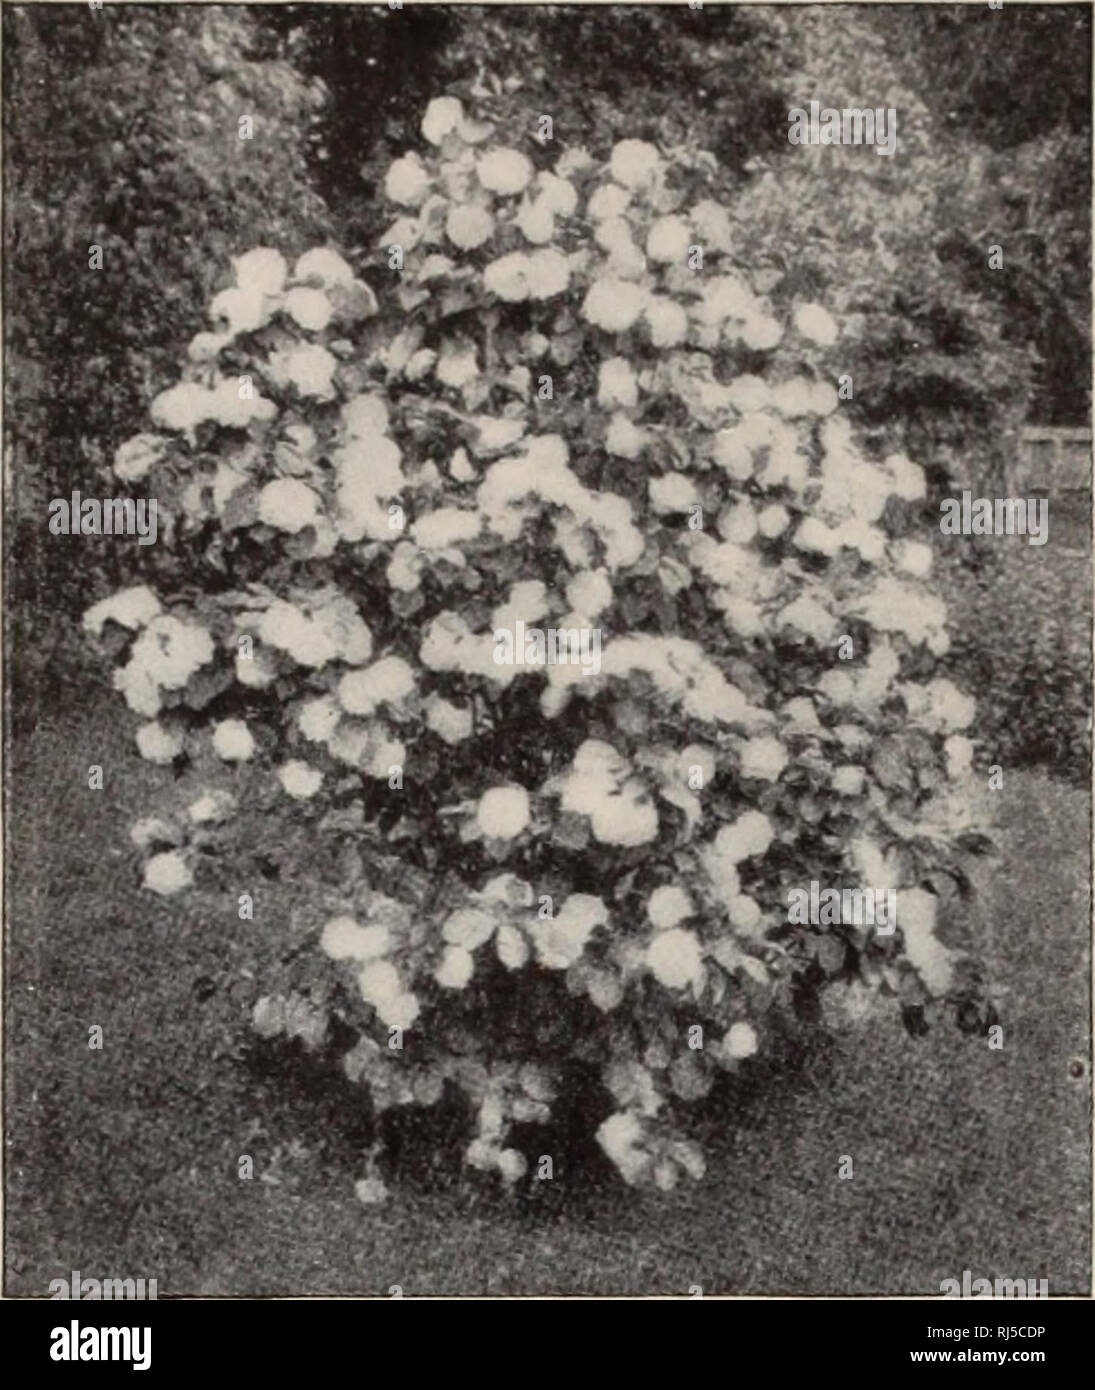 . Choice hardy trees and plants / F.W. Kelsey Nursery Company.. Nursery Catalogue. 46 FREDERICK W. KELvSEY.. VIBURNUM PLICATUM. VACCINIUM vacillans(II). A smaller shrub than V. corymbosum ; produces the well-known blue- berry fruit of commerce. 25 and 35 cts. Low prices in quantity. VIBURNUM acerifolium. Mai i e-Leaved Vi- BURNTM (II). Flat clusters of white flowers in early spring-; dark berries in autumn. 35 cts. VIBURNUM cassinoides (II). Rich green leaves and white flowers in June; handsome dark red berries in fall. 25 cts. VIBURNUM Cotinifolum. A fine variety; white flowers in early sprin Stock Photo